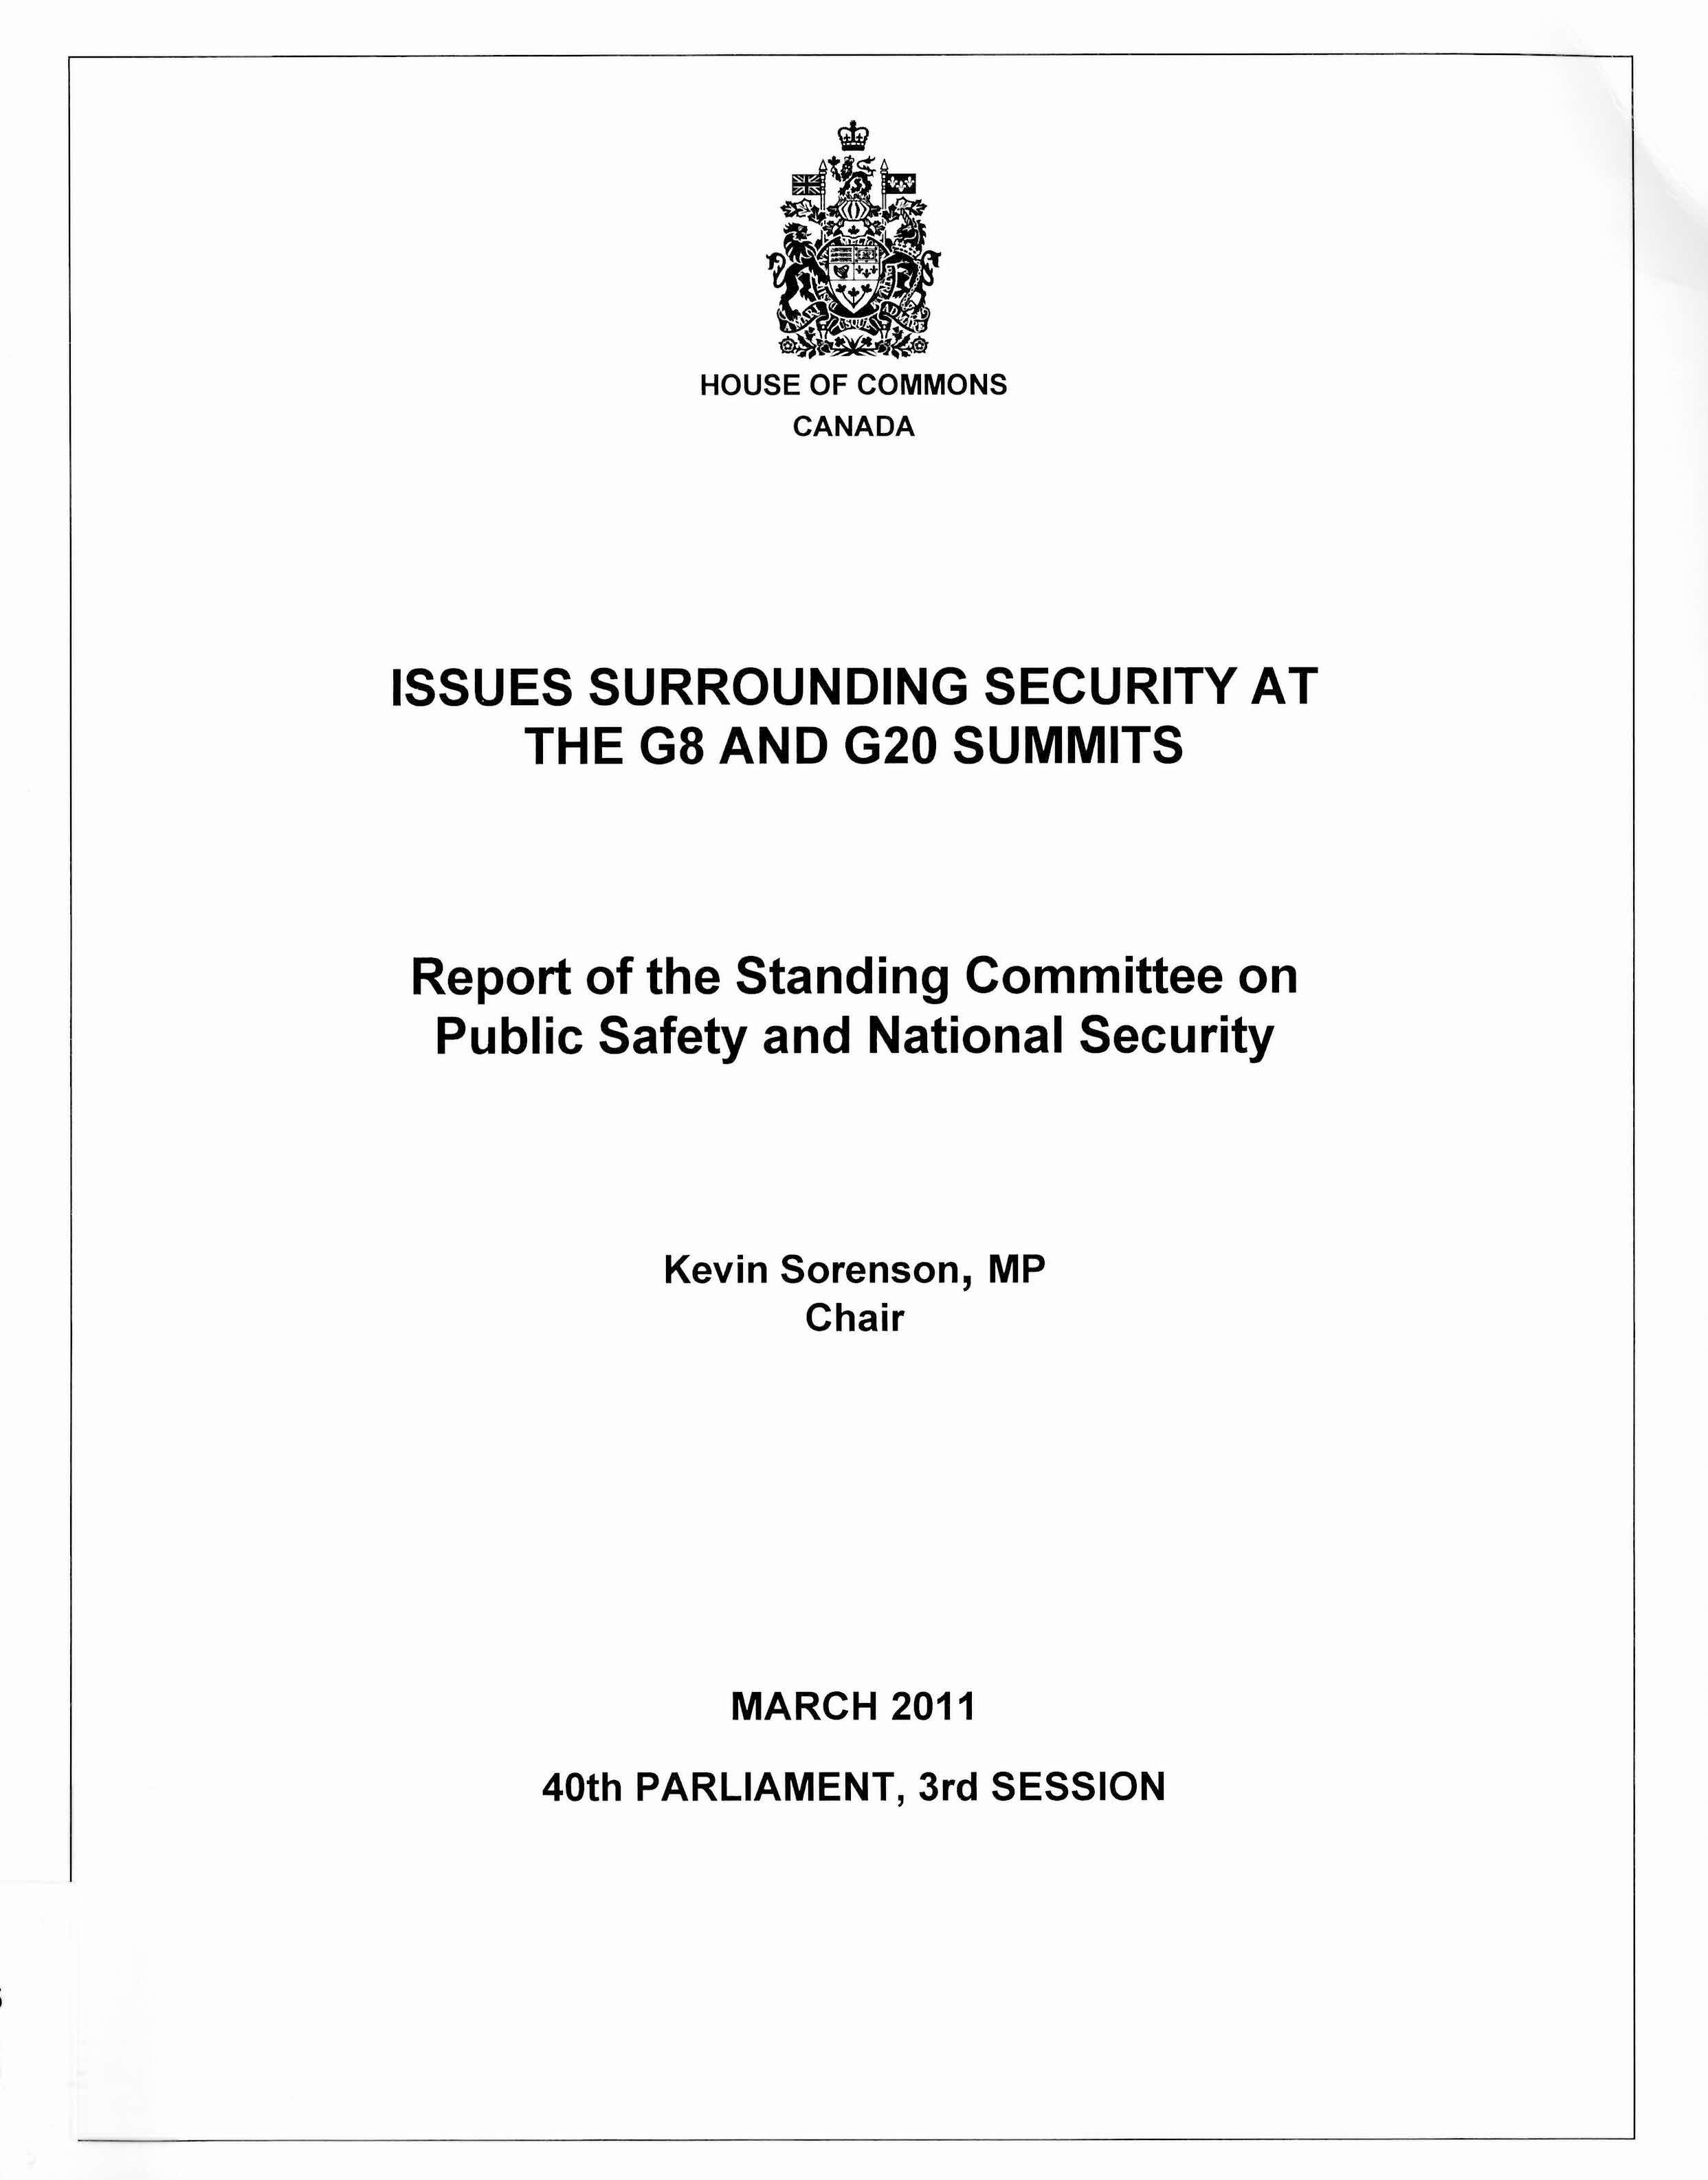 Issues surrounding security at the G8 and G20 summits : report of the Standing Committee on Public Safety and National Security